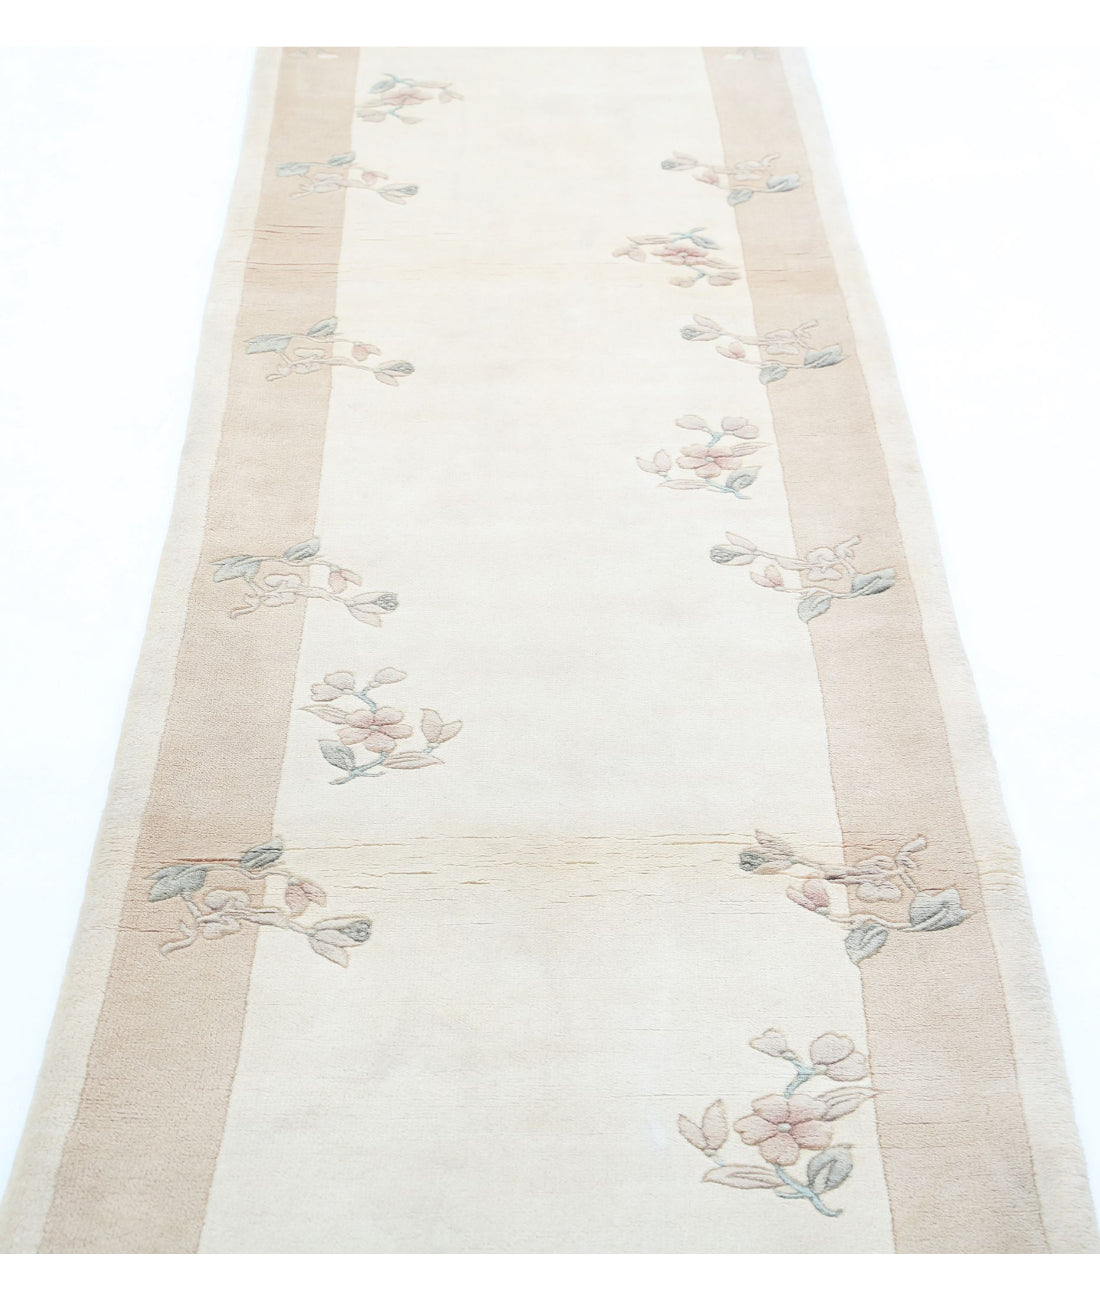 Chinese 2'6'' X 10'4'' Hand-Knotted Wool Rug 2'6'' x 10'4'' (75 X 310) / Ivory / Grey